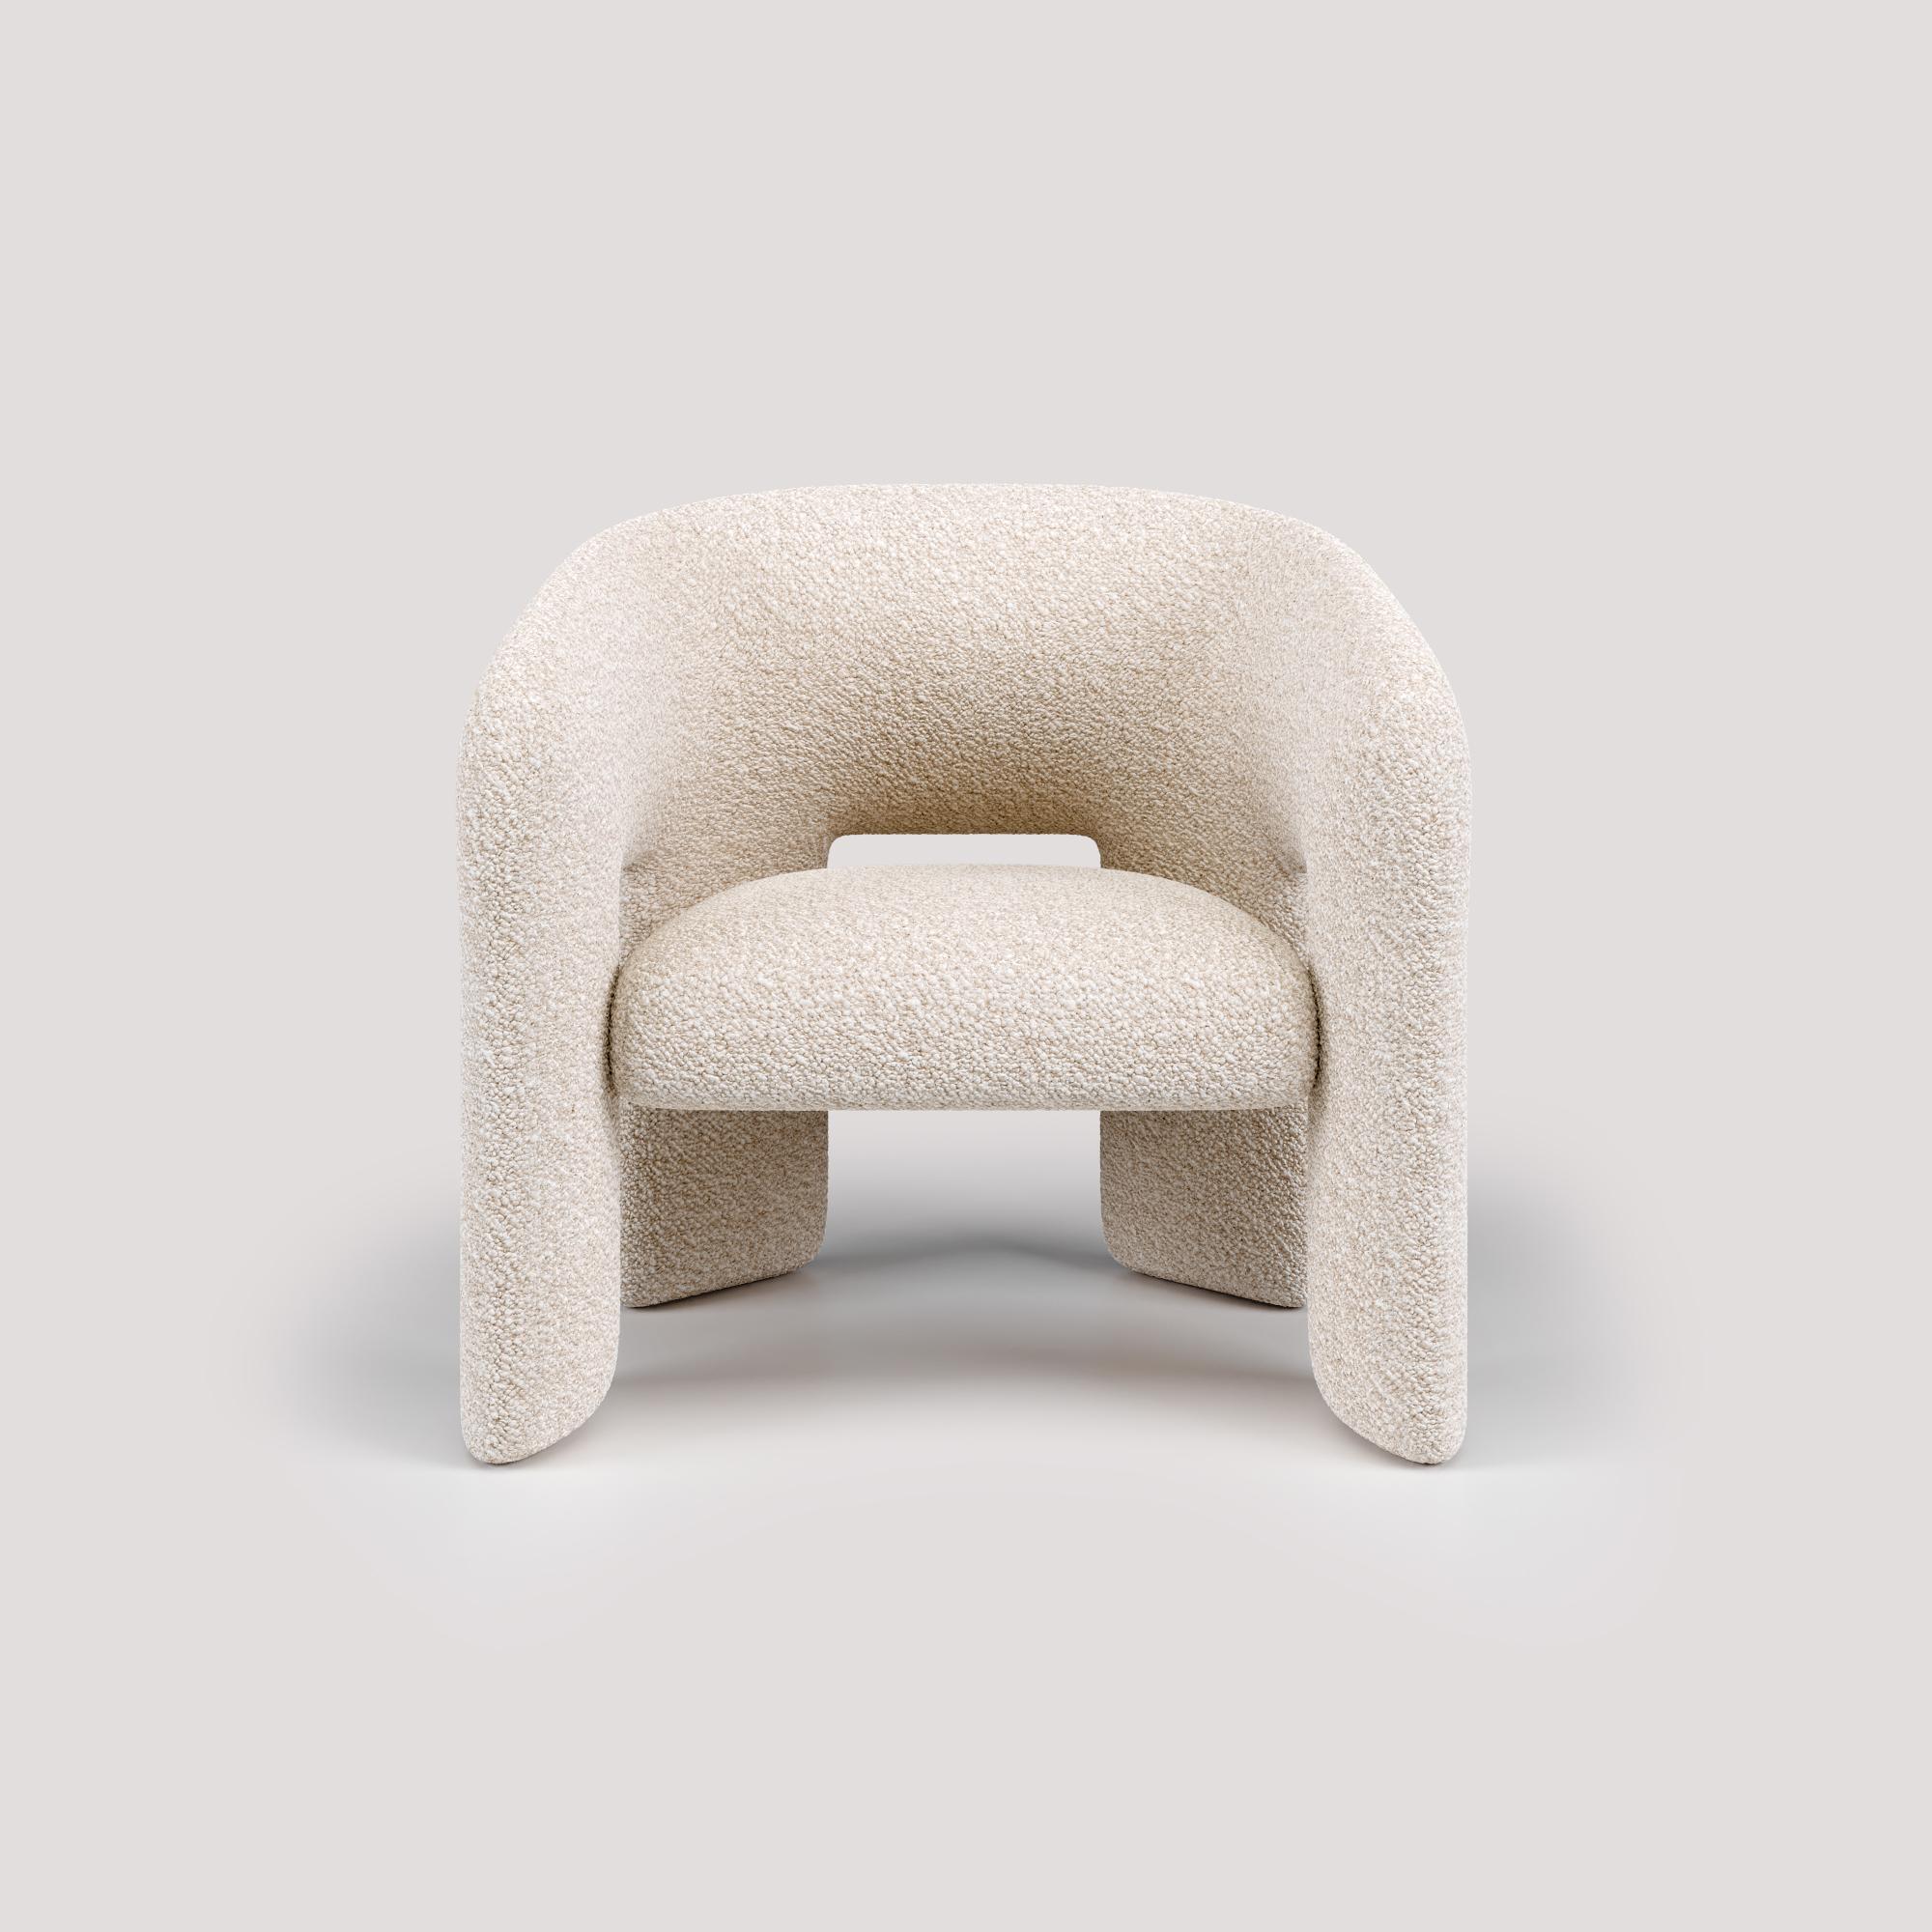 Celebrating the art of relaxed sophistication, the Bold Armchair is a statement piece that embodies the spirit of modern design. The skillful use of high-quality materials, combined with craftsmanship, gives the Bold Armchair a modern and